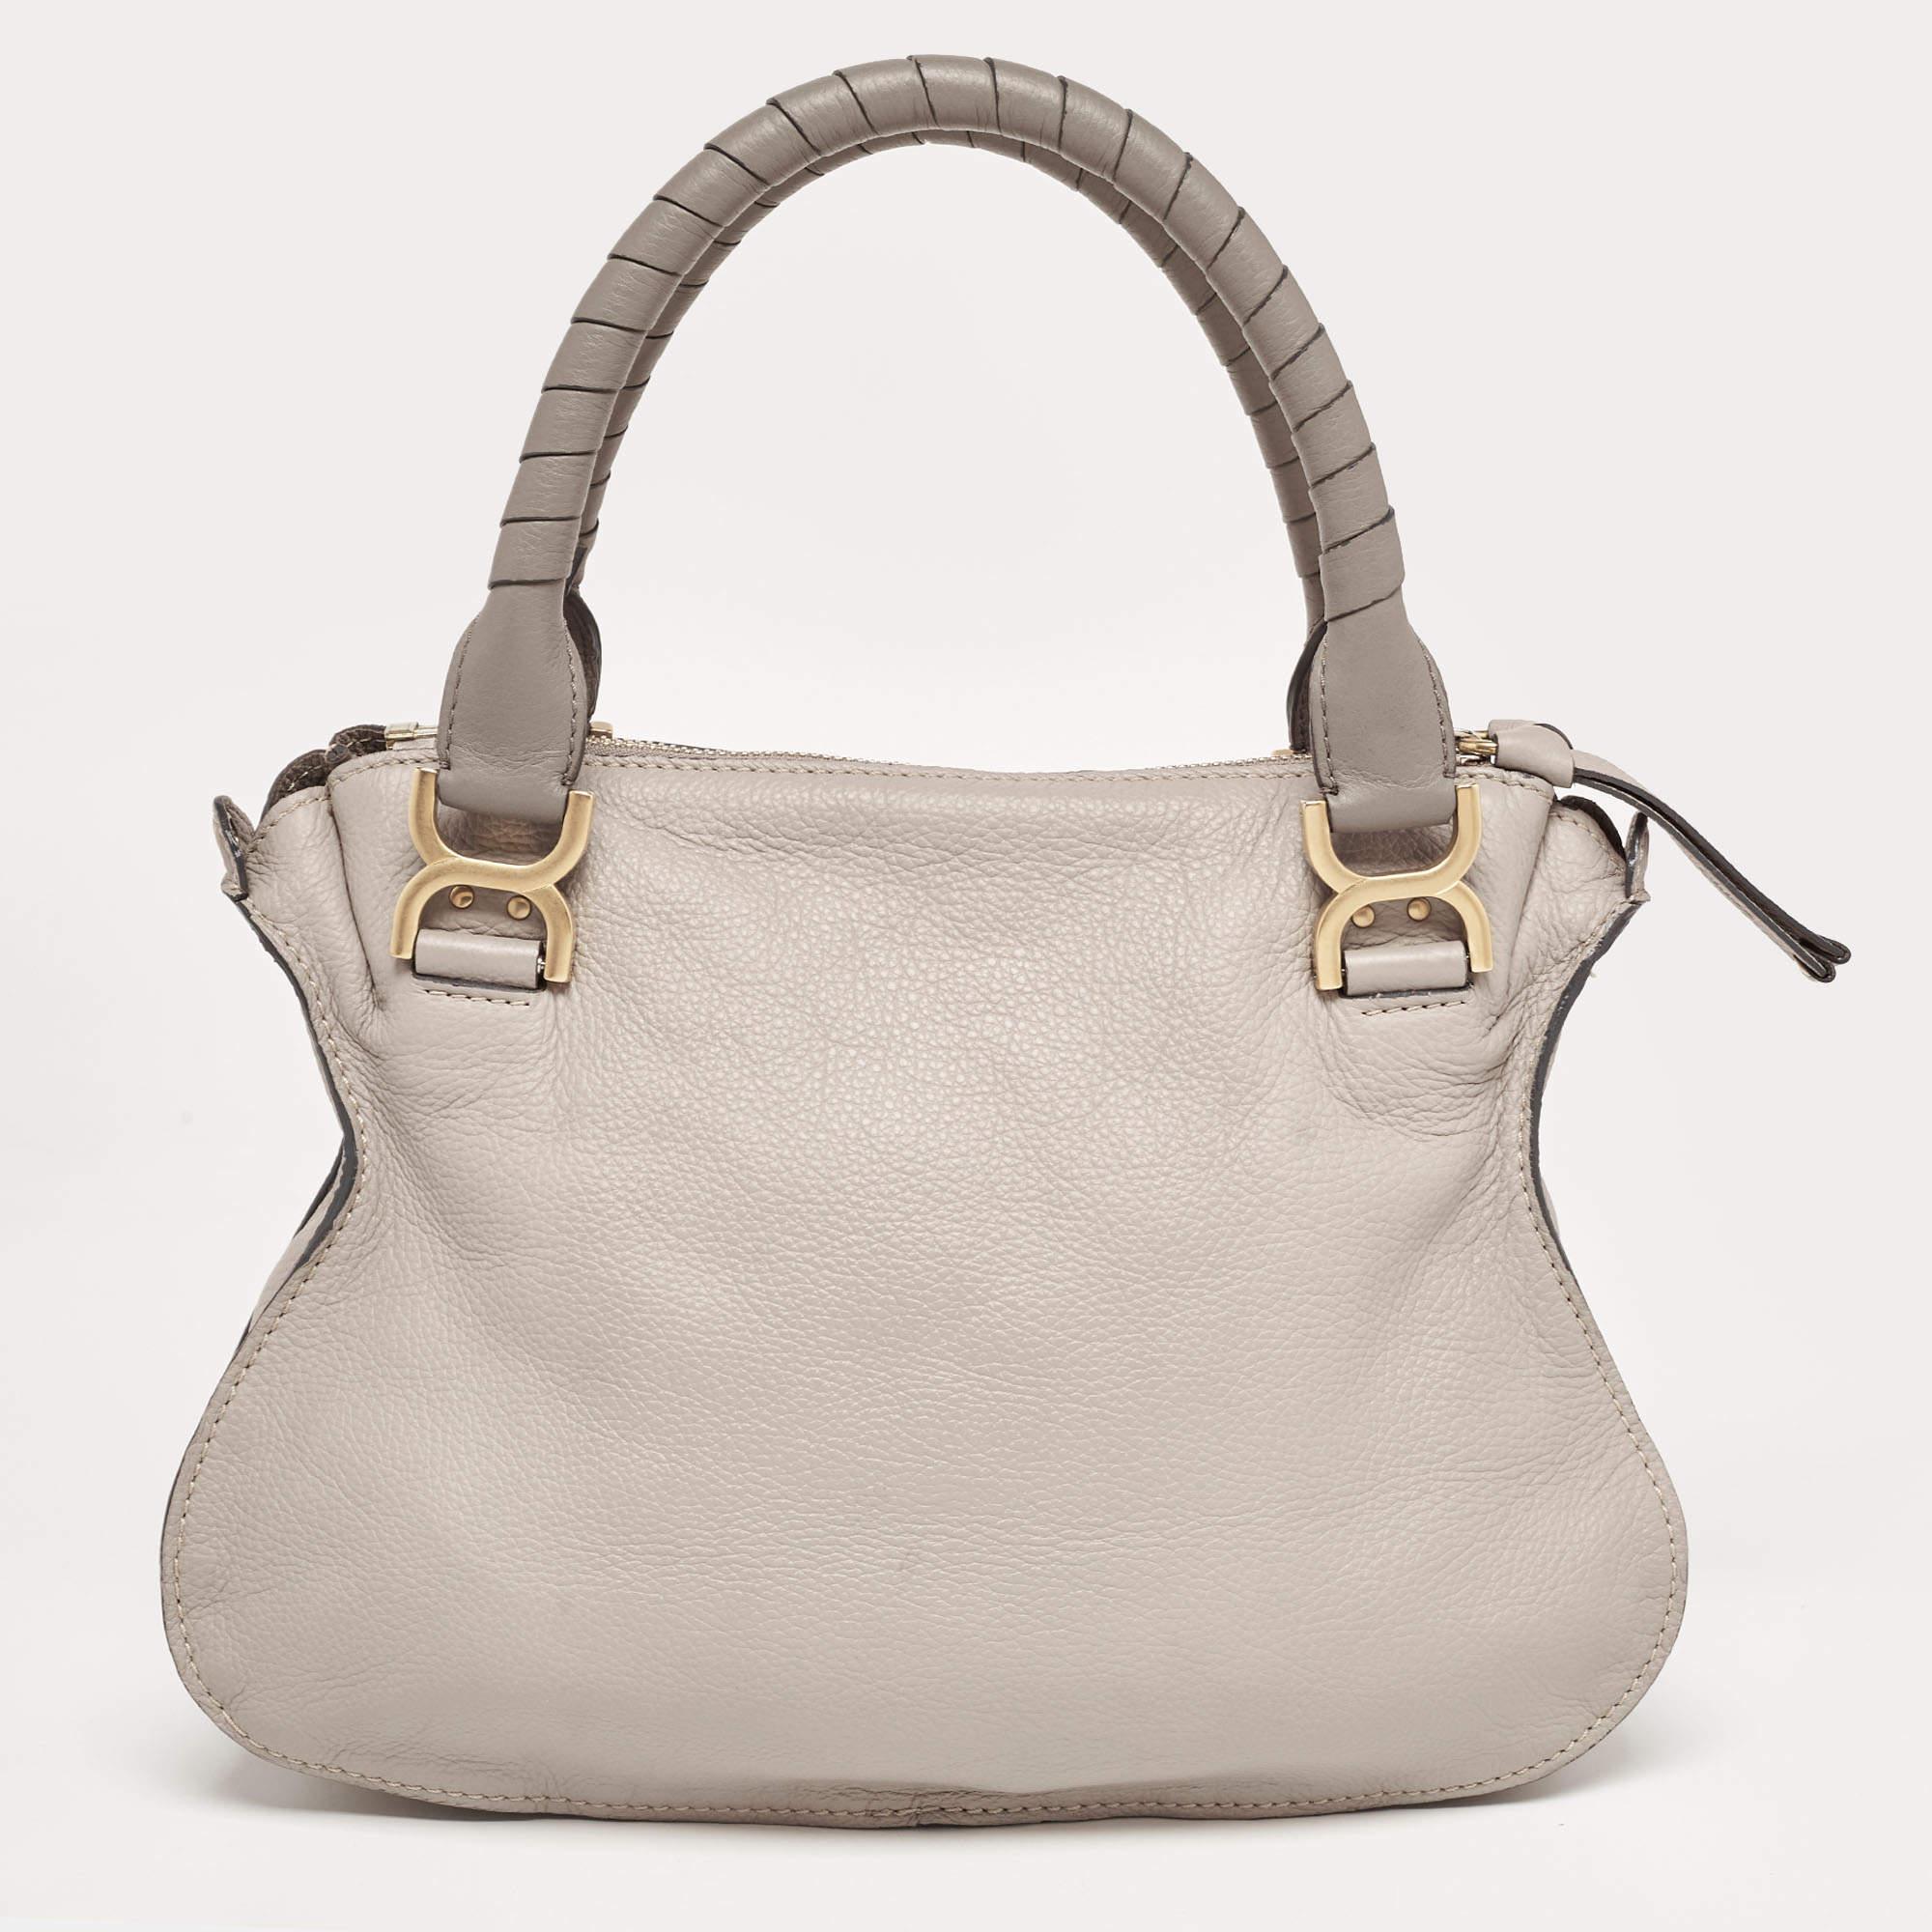 This Marcie Bag from the house of Chloé is a compact yet stylish bag with pretty braided details on it, making the bag even more pretty and feminine. This lovely creation crafted from leather features a top zipper closure and comes fitted with two